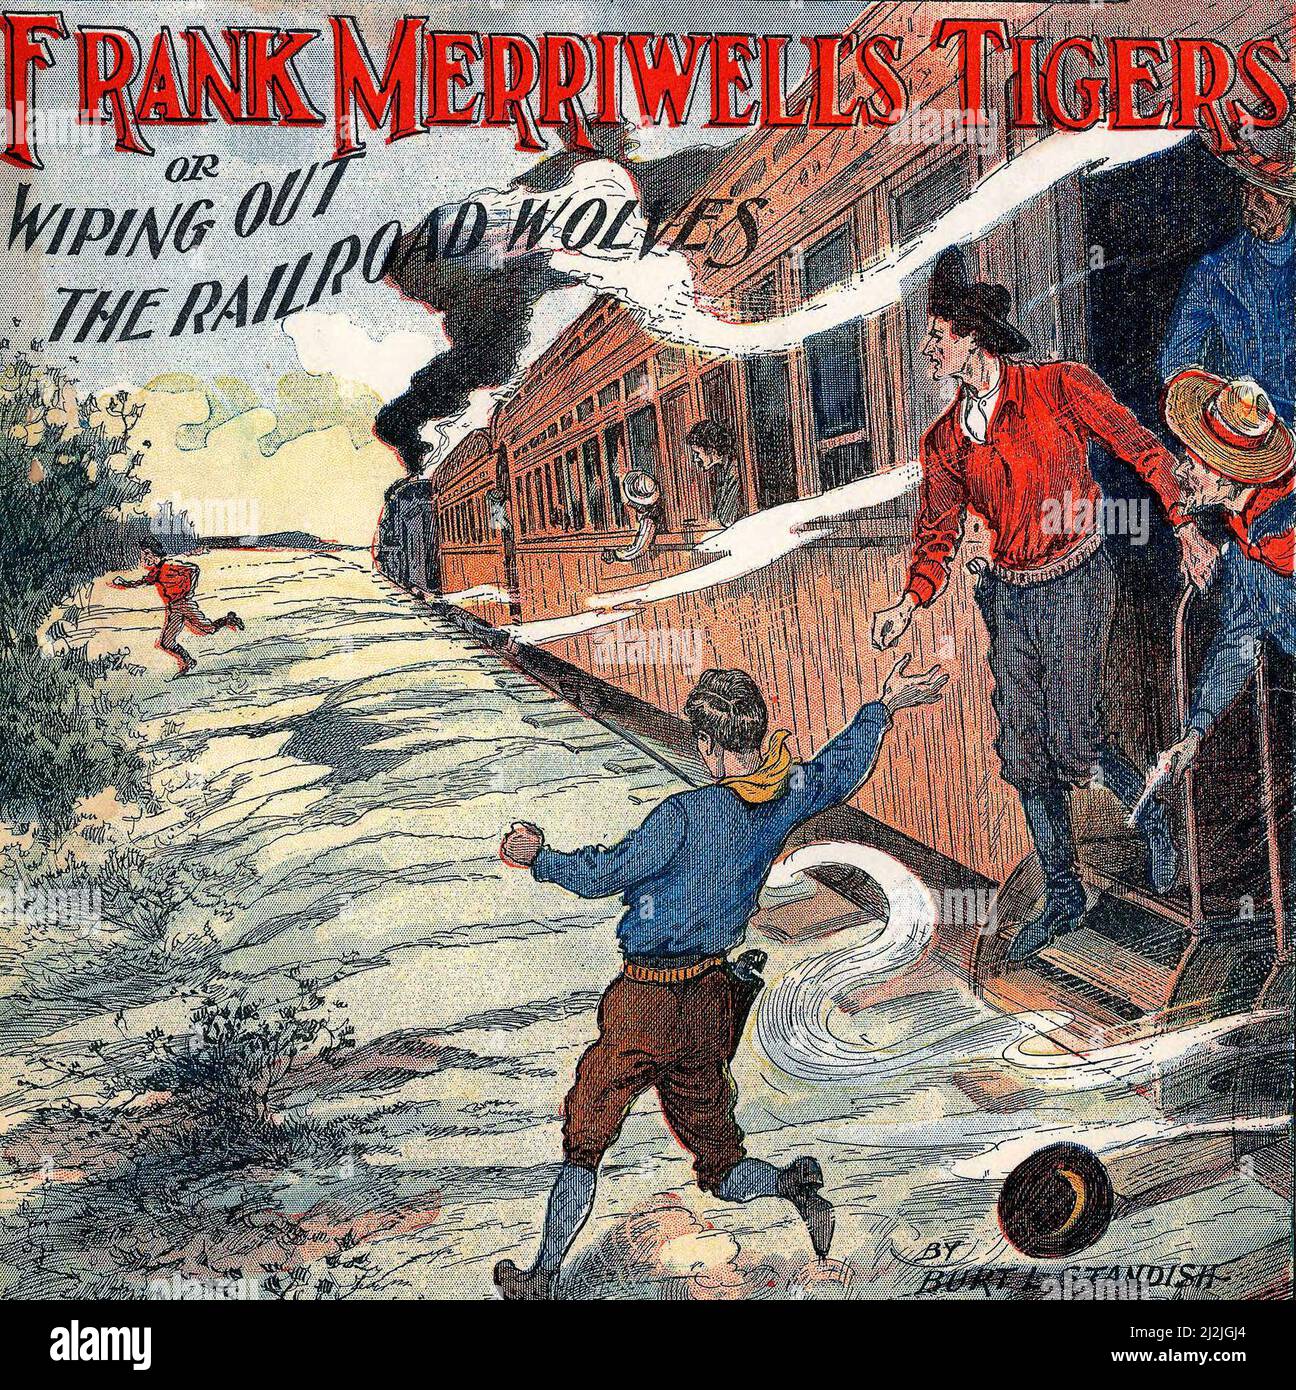 Frank Merriwell’s Tigers, or, Wiping out the Railroad Wolves, 1905 Stock Photo